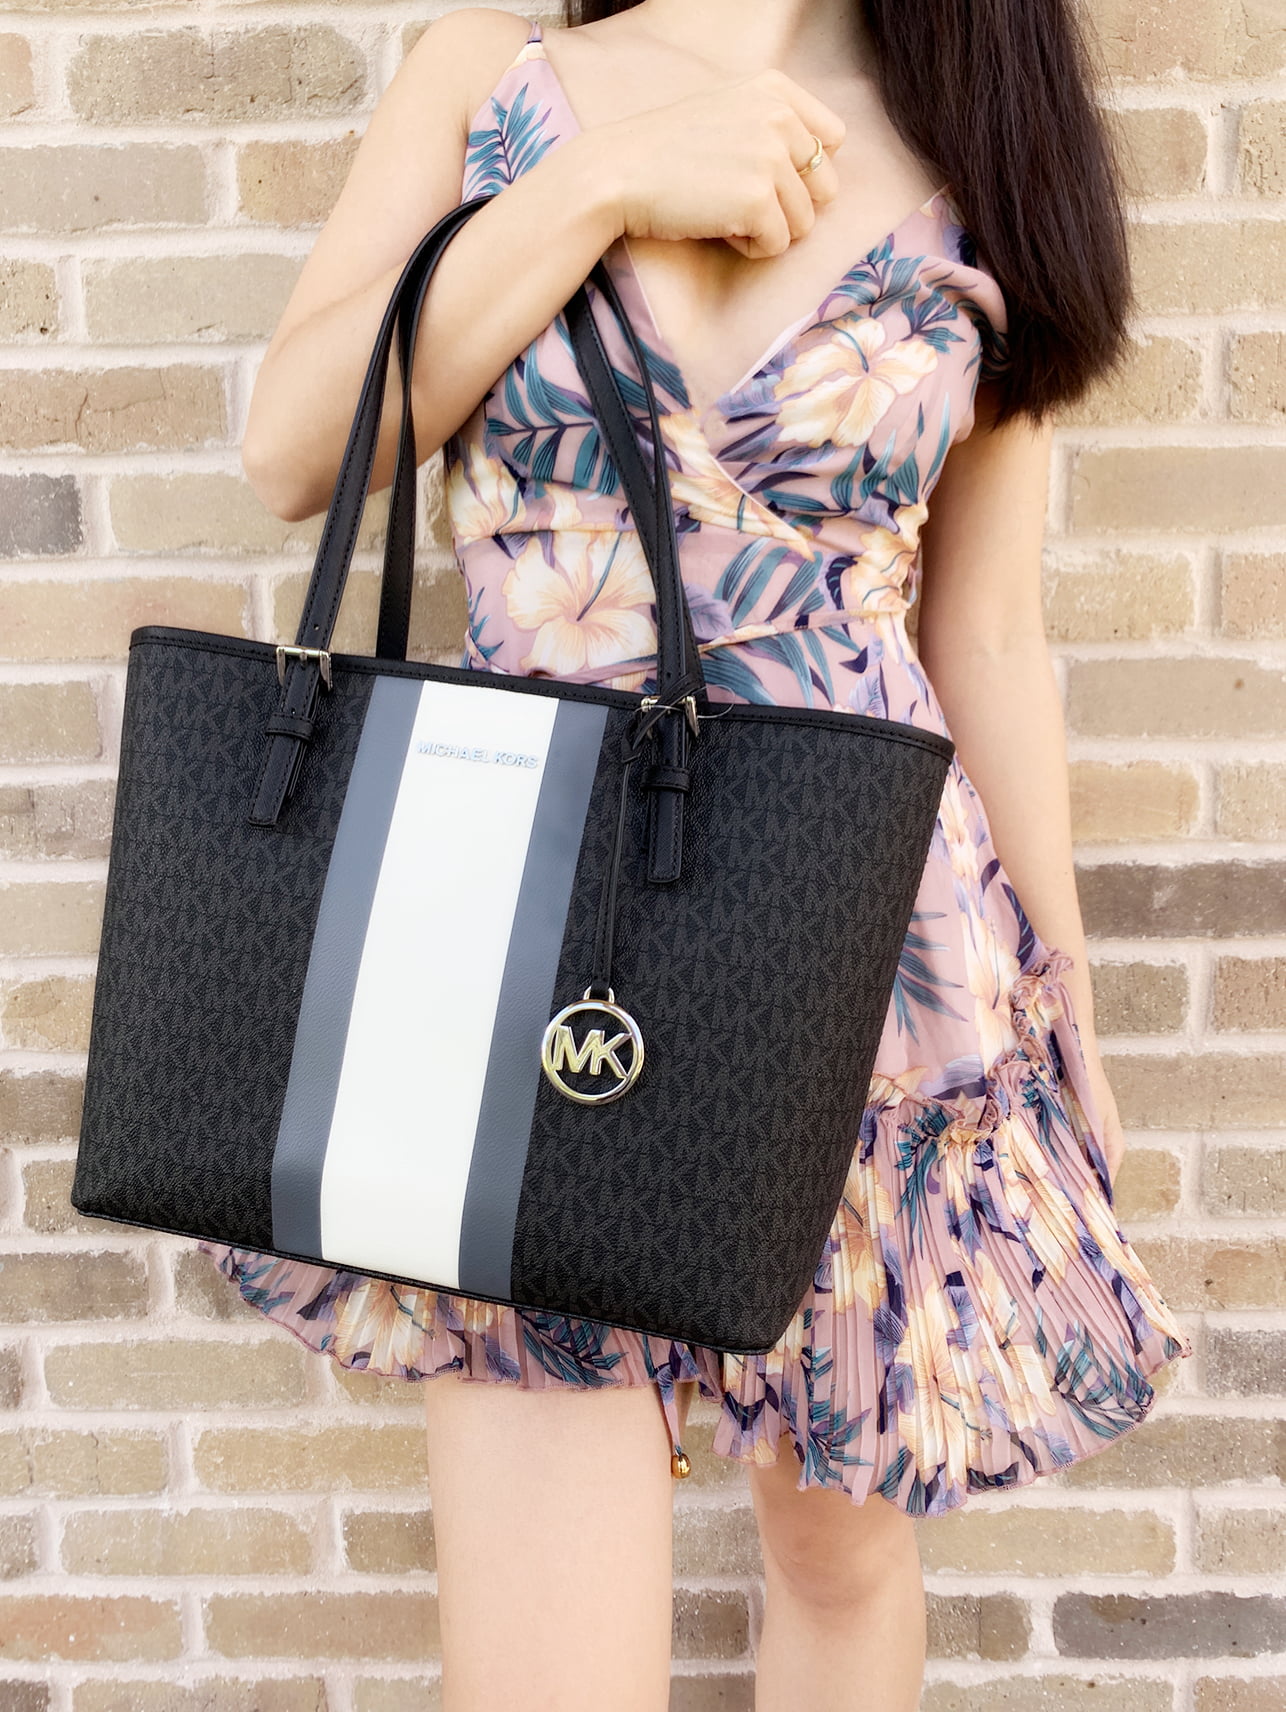 black and white striped michael kors tote